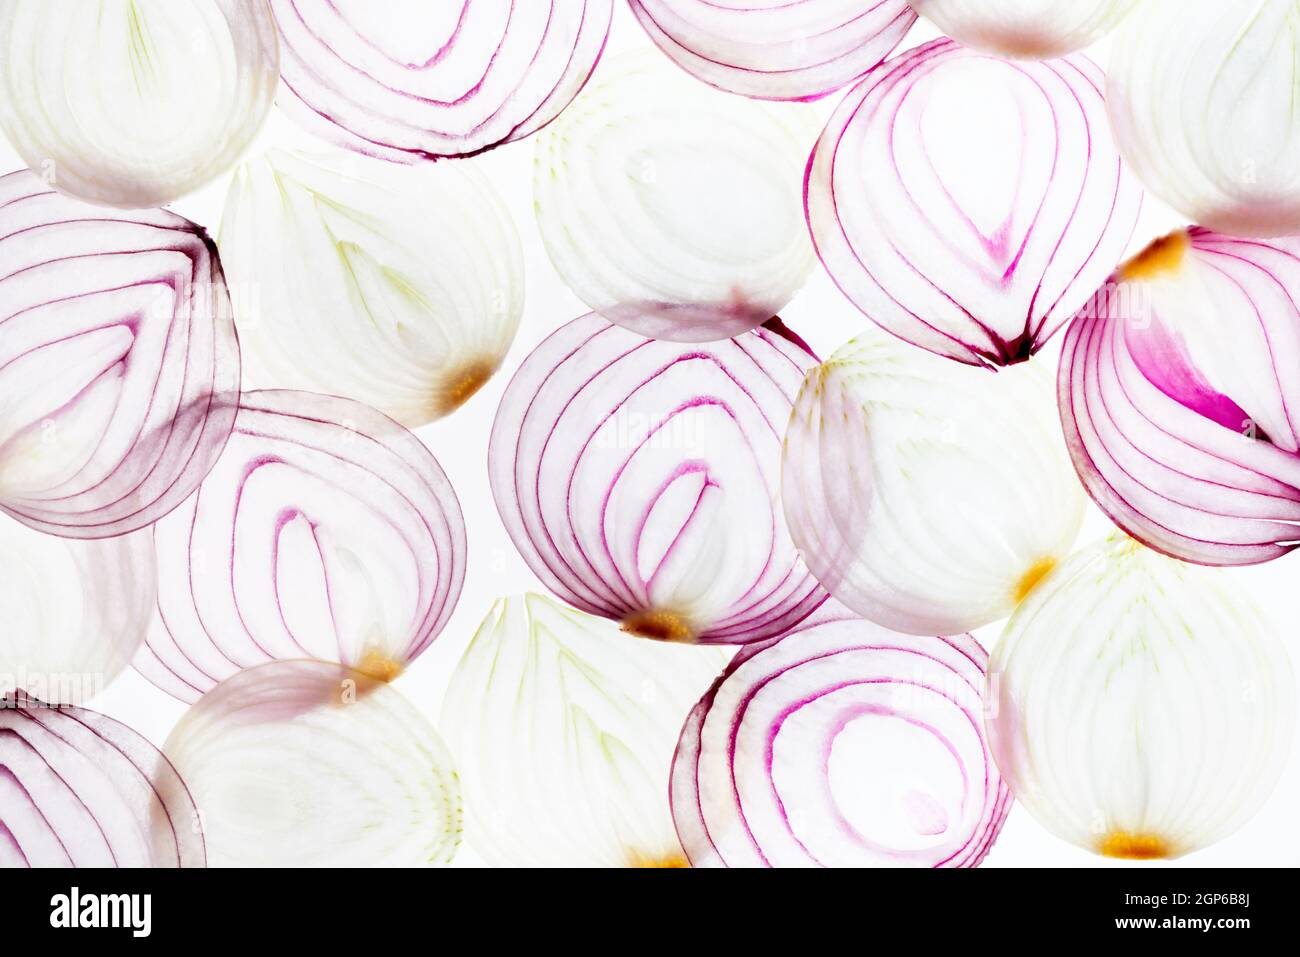 beautiful fresh sliced red and white onions background Stock Photo